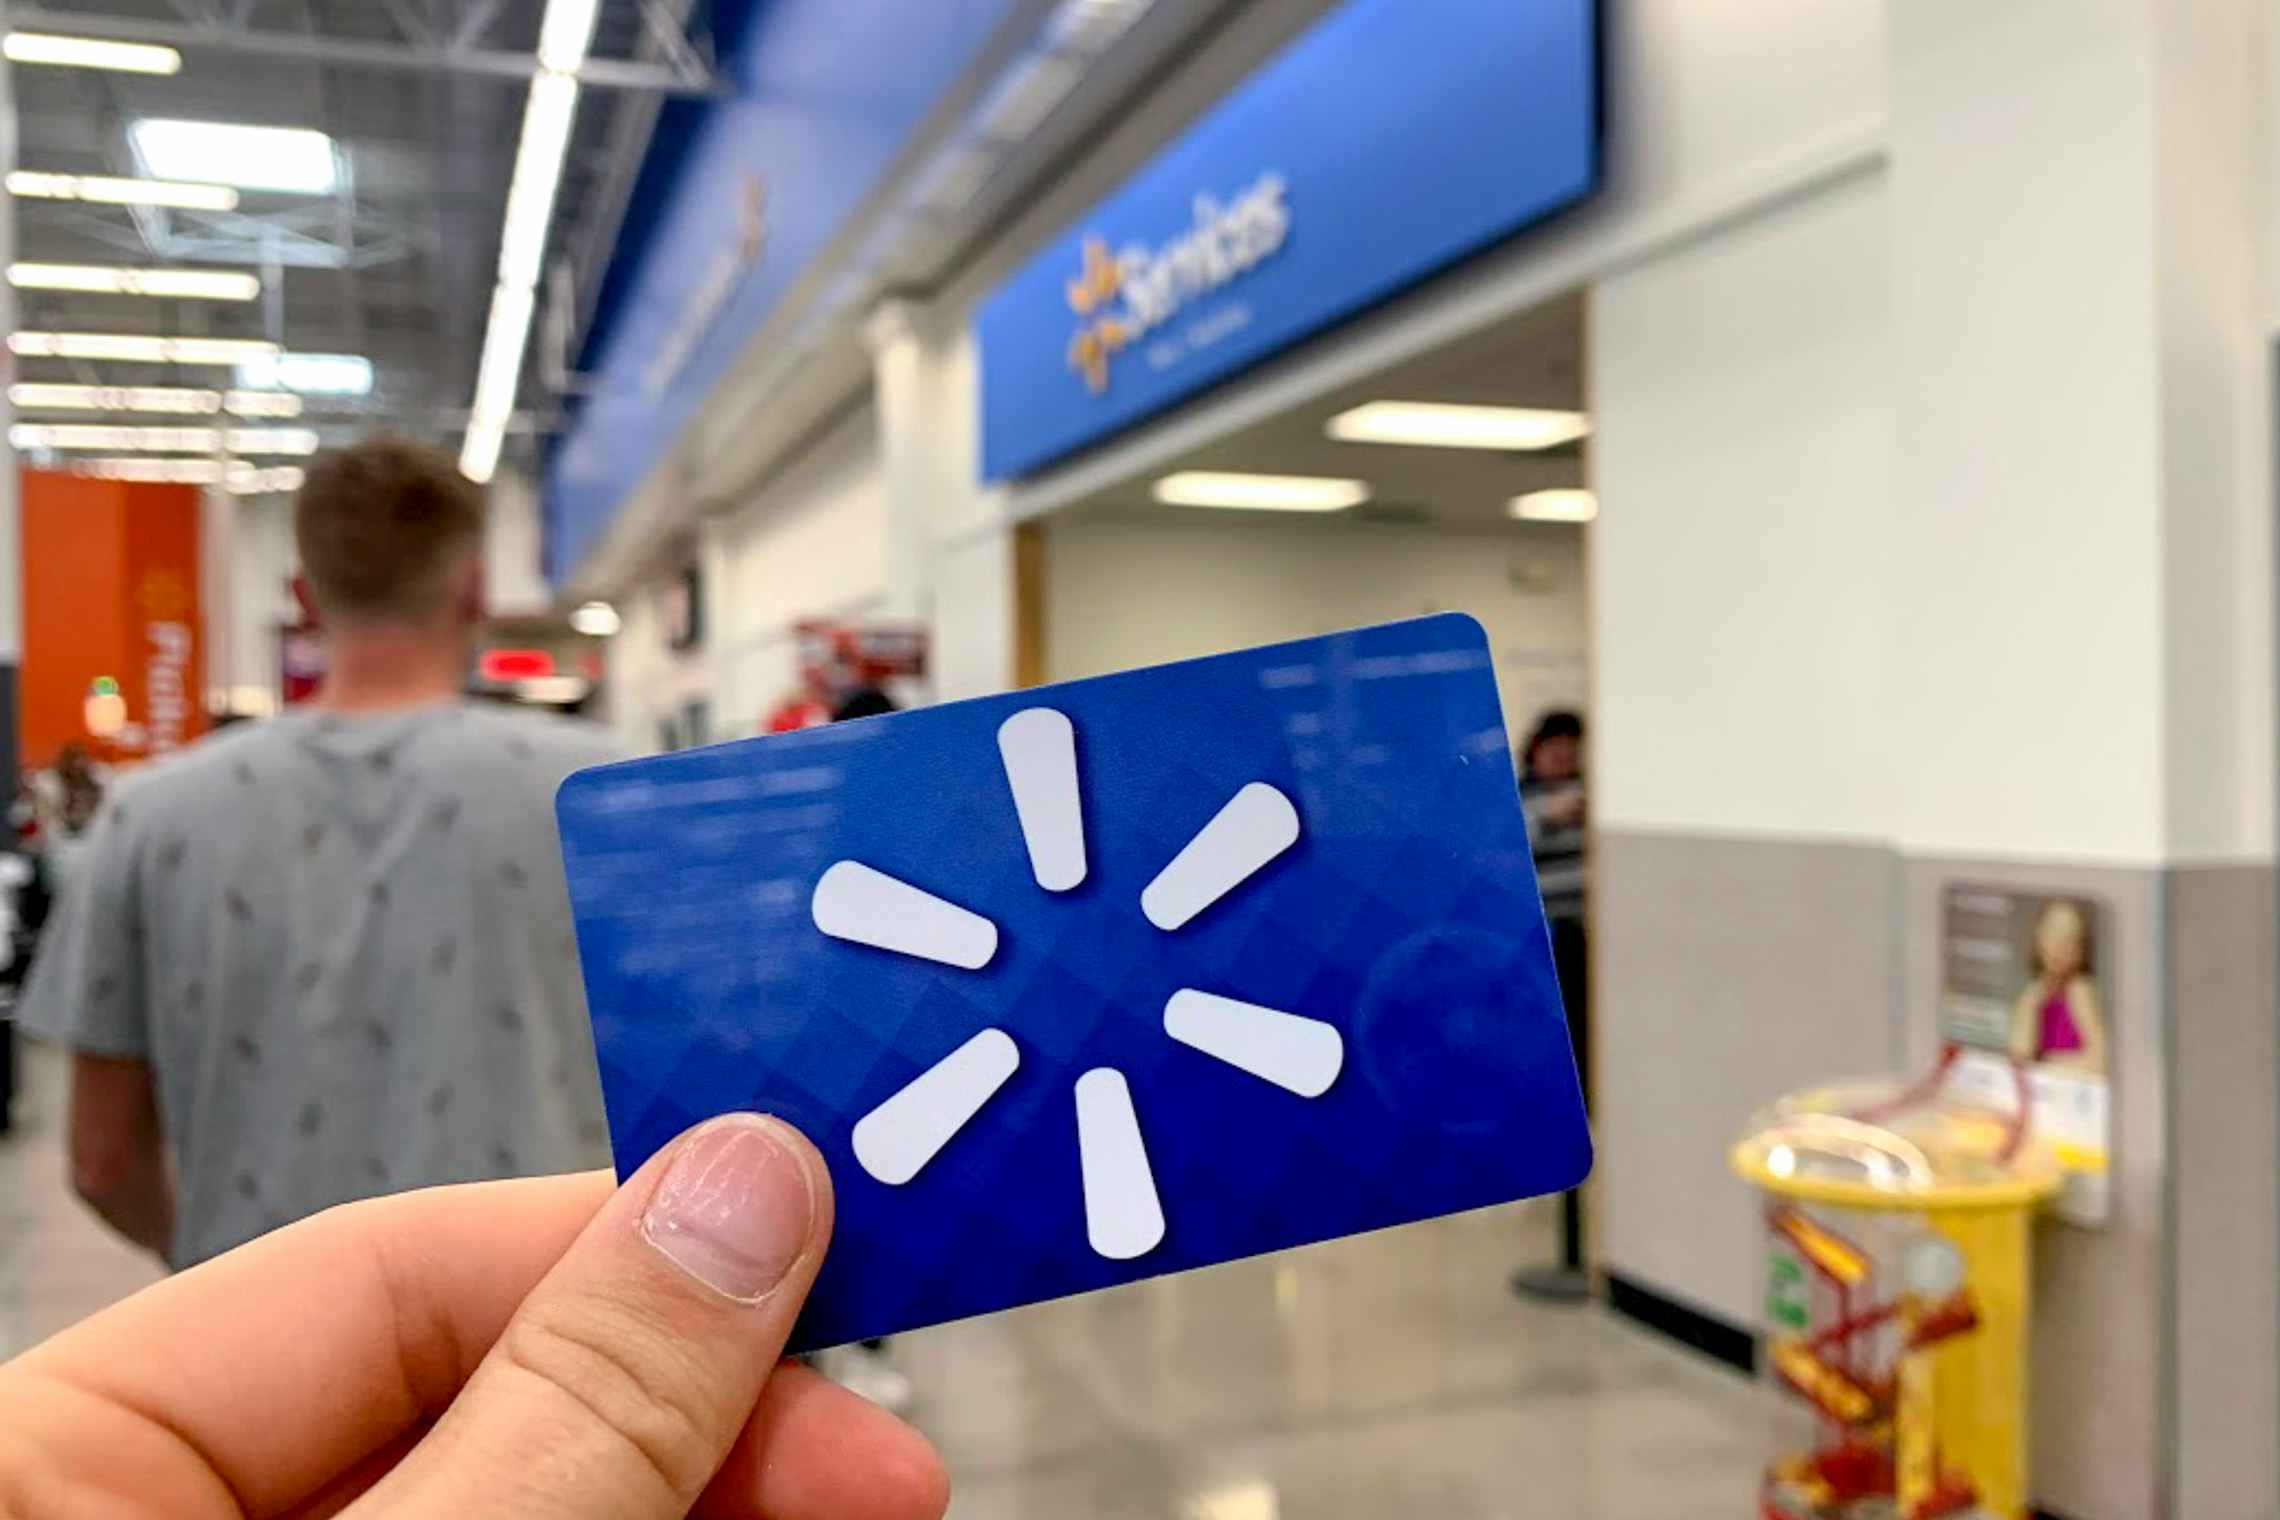 Walmart gift card held up in front of service center